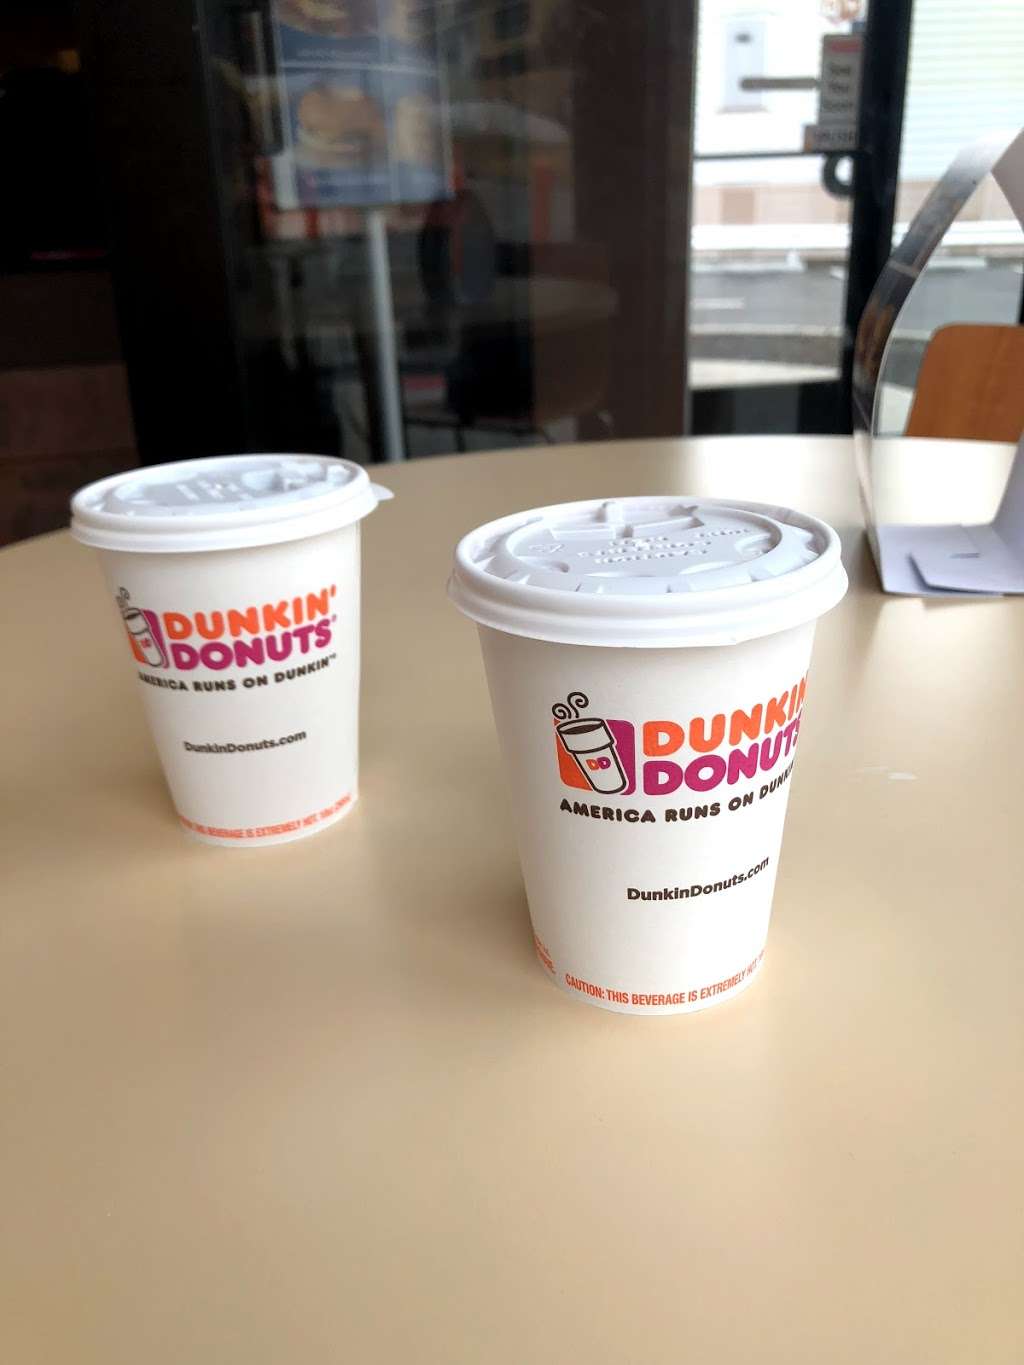 Dunkin Donuts - cafe  | Photo 8 of 10 | Address: 93 Valley Rd, Clifton, NJ 07013, USA | Phone: (973) 278-1574